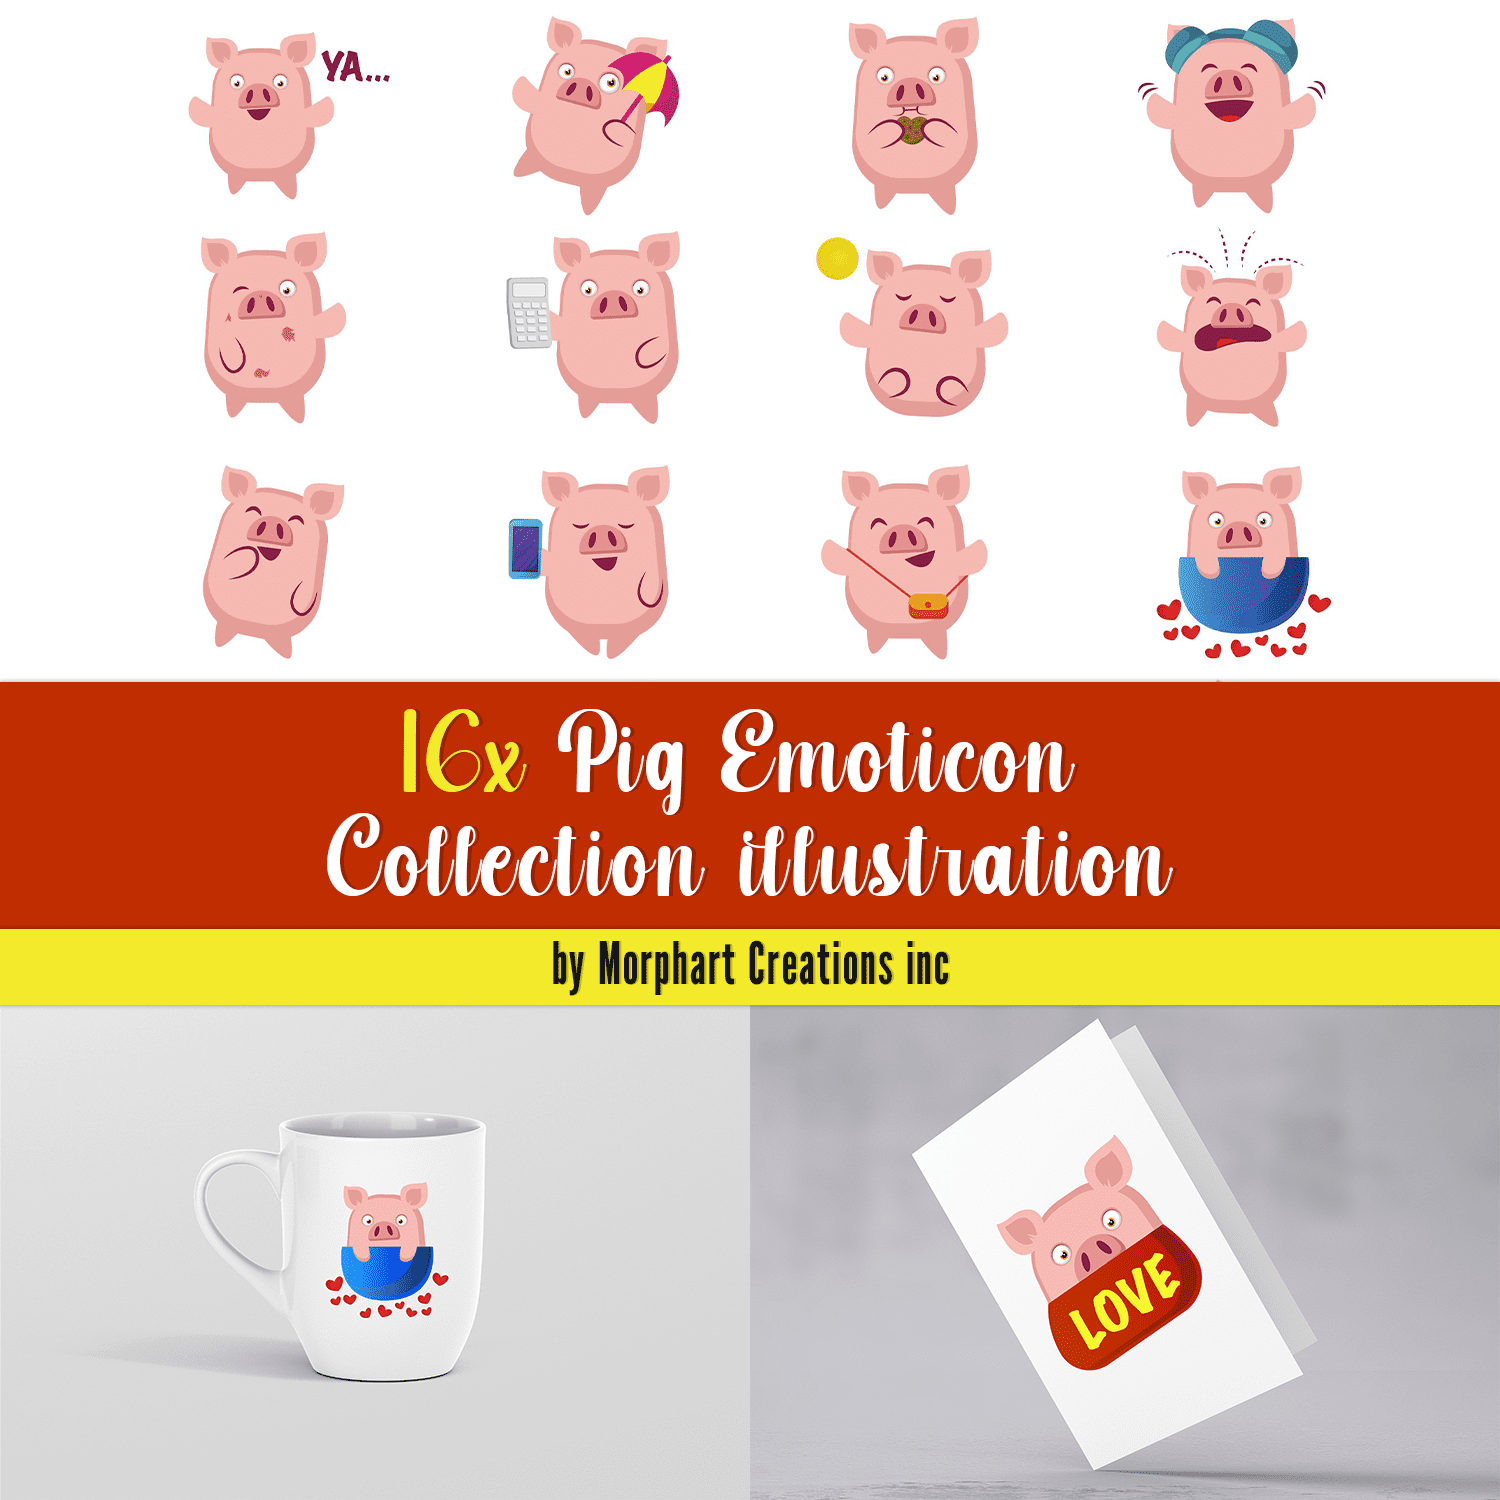 A pack of gorgeous images of pigs emoticons.